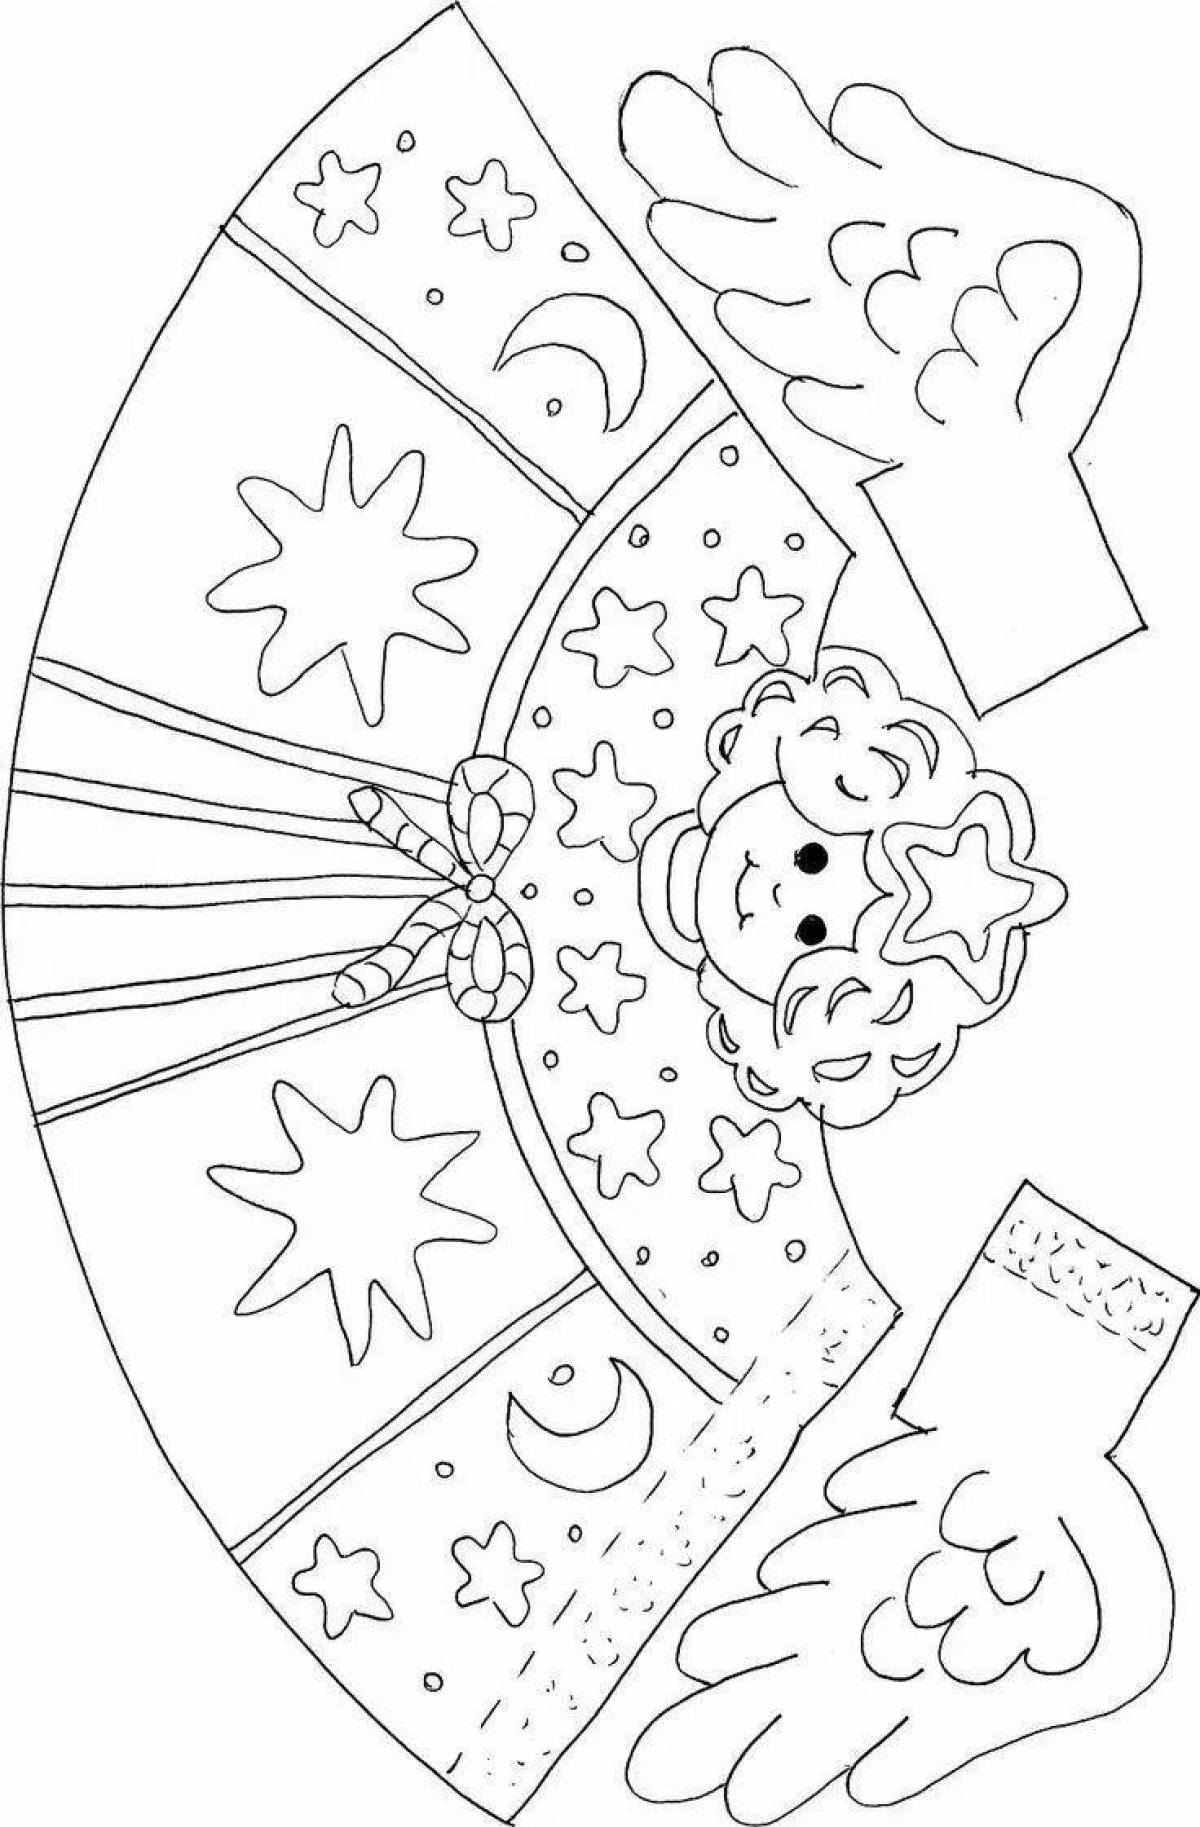 Joyful coloring crafts for the new year